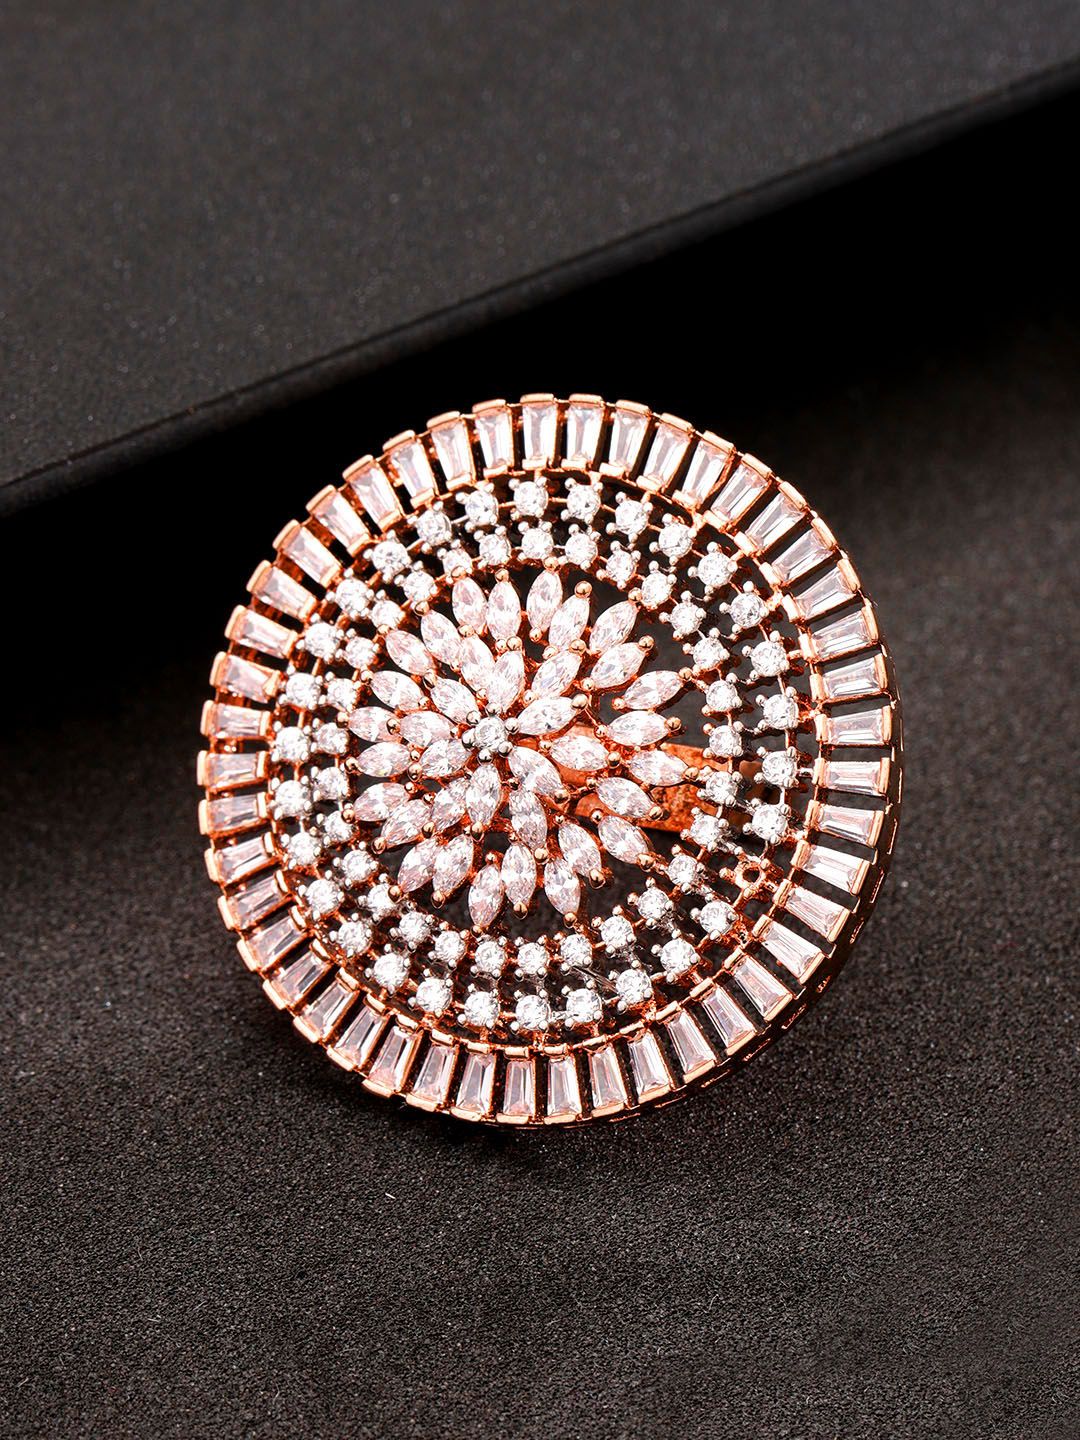 Priyaasi Rose Gold-Plated Handcrafted American Diamond Studded Adjustable Finger Ring Price in India